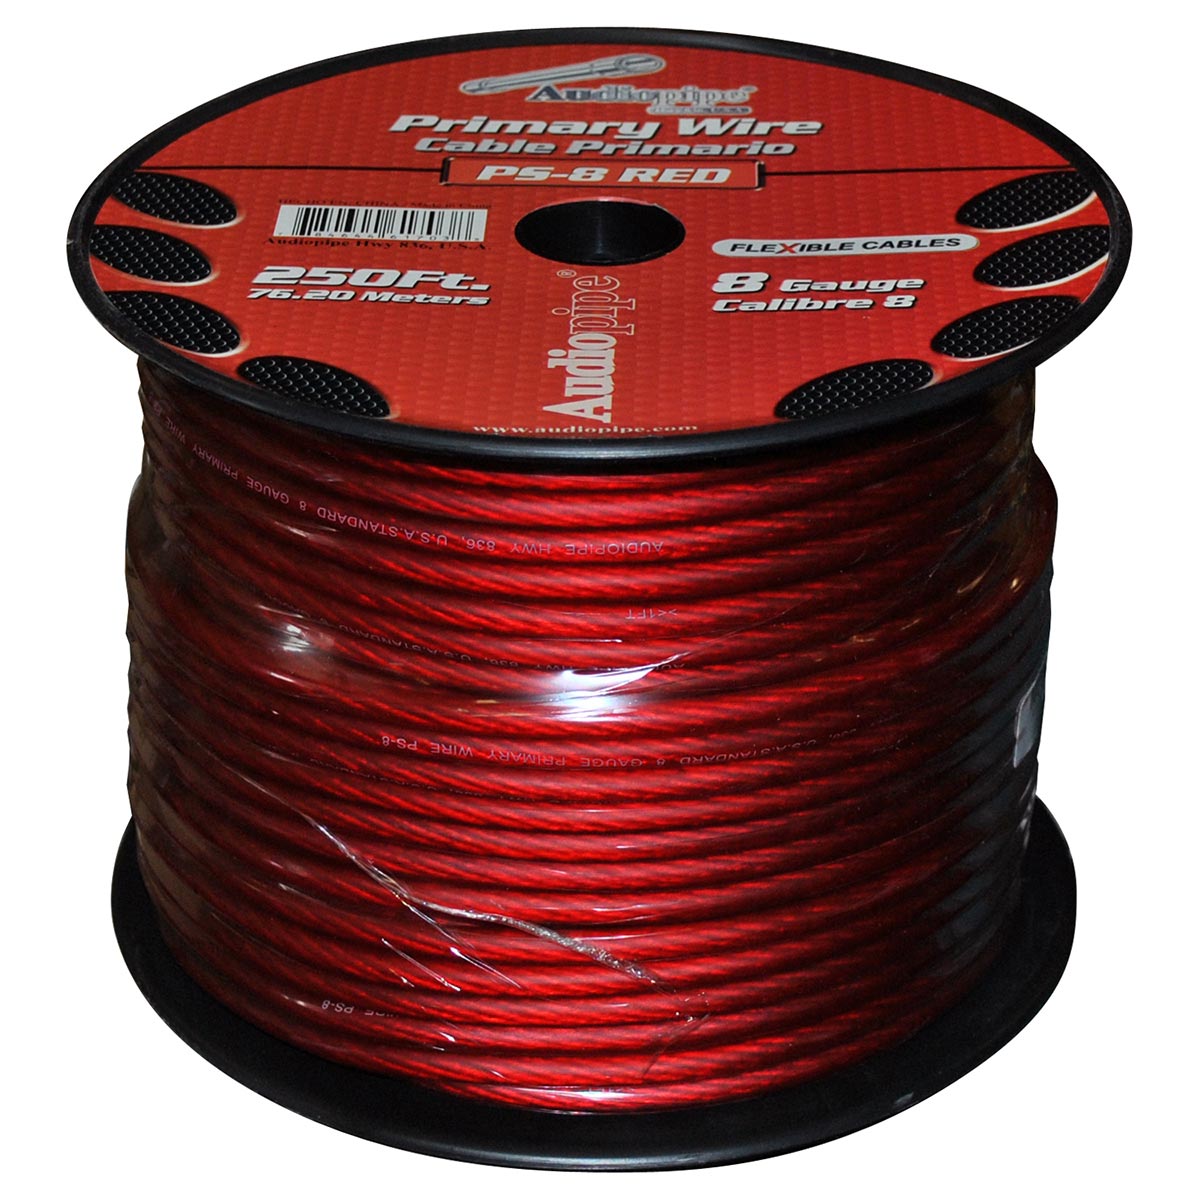 Audiopipe PS8RD Power Cable 8 Gauge 250 Foot – Red